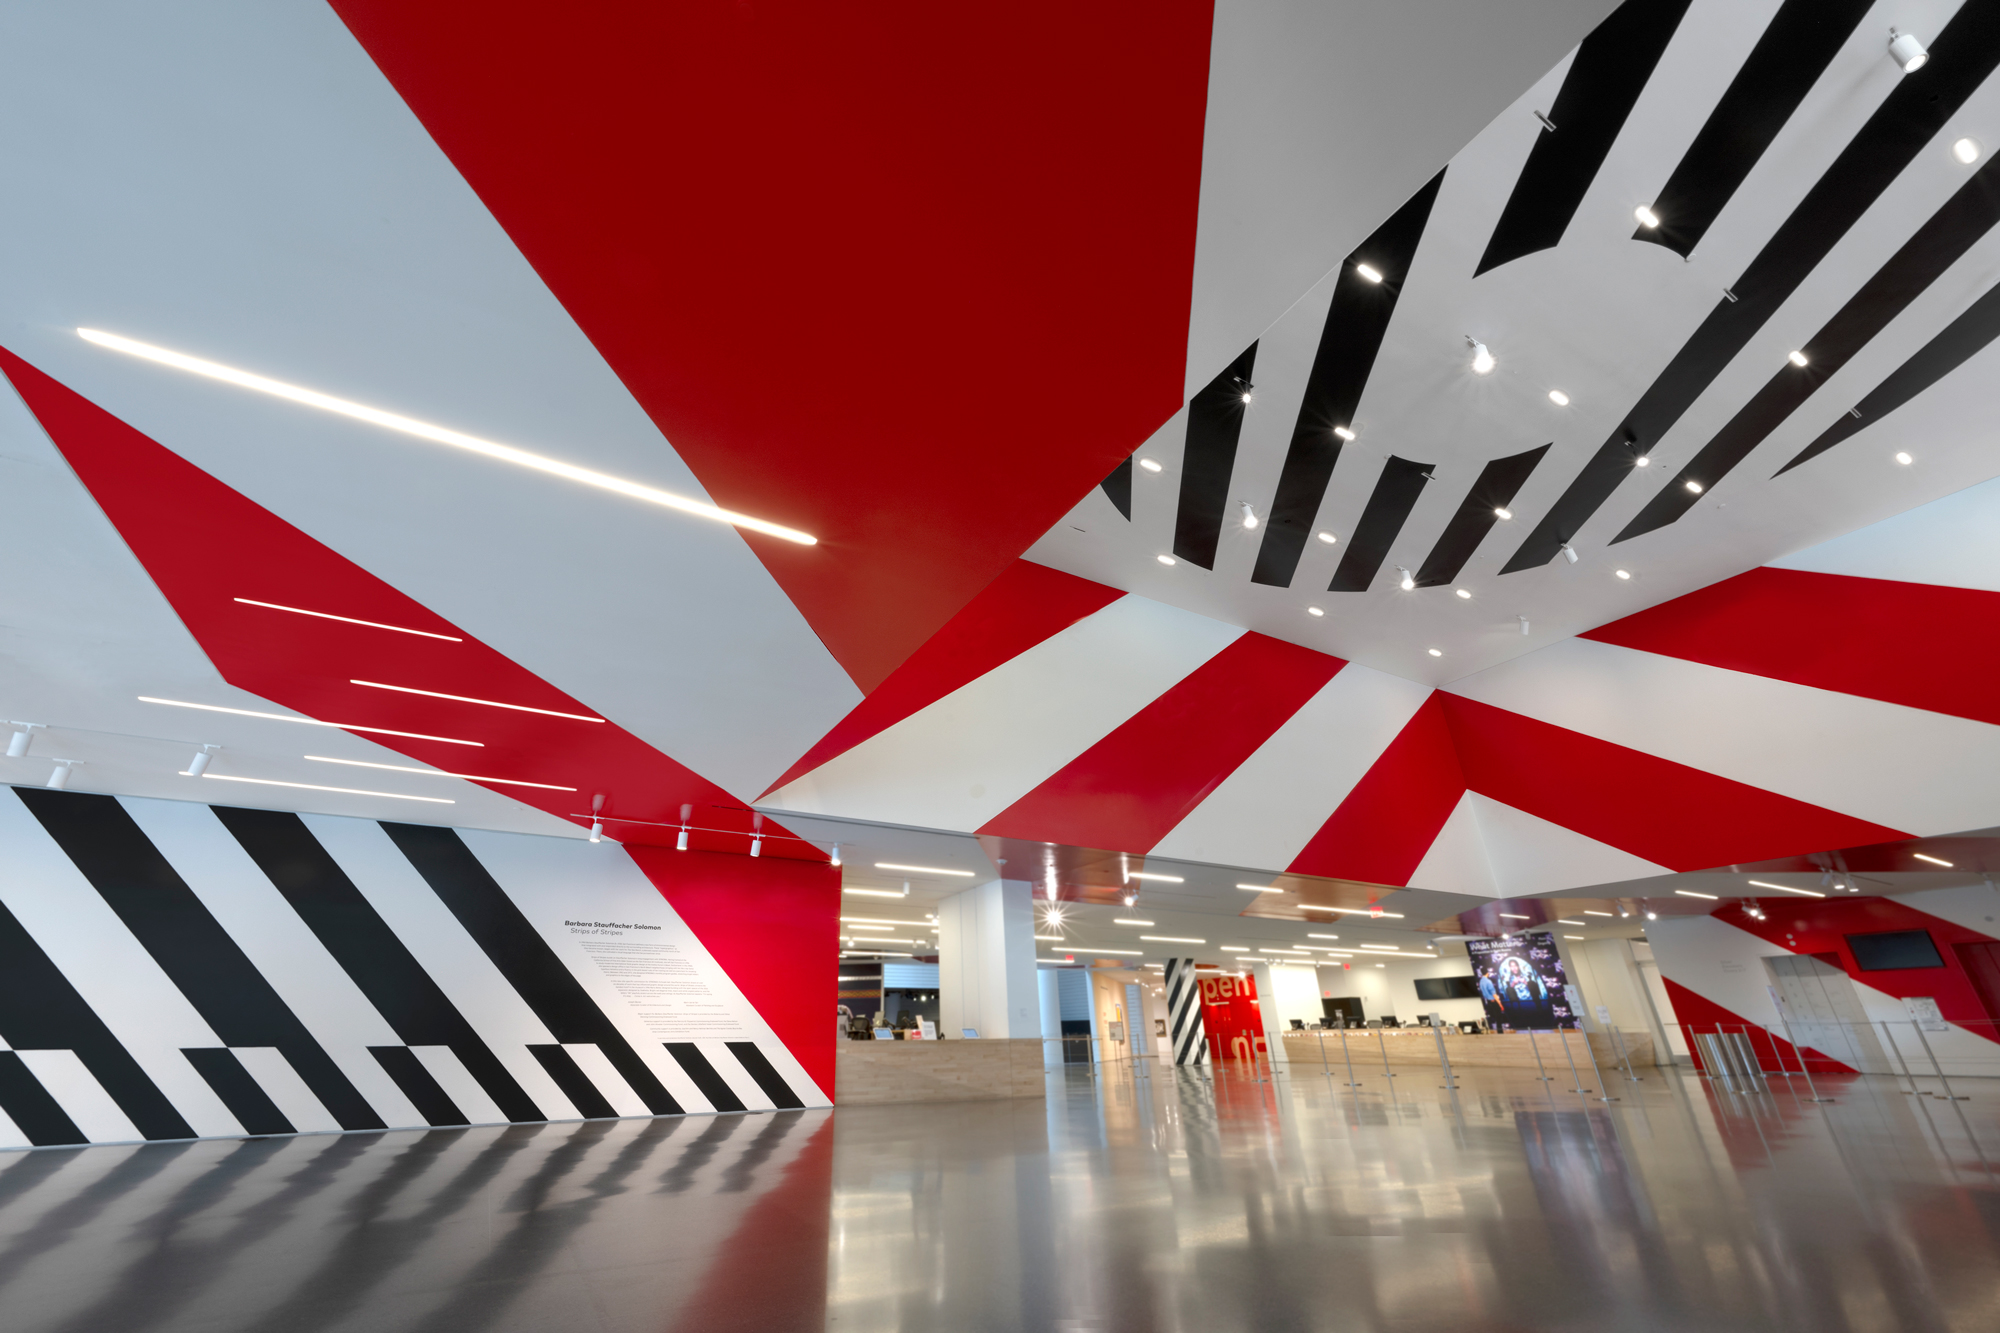 Red and black stripes painted on white walls and ceilings of lobby space